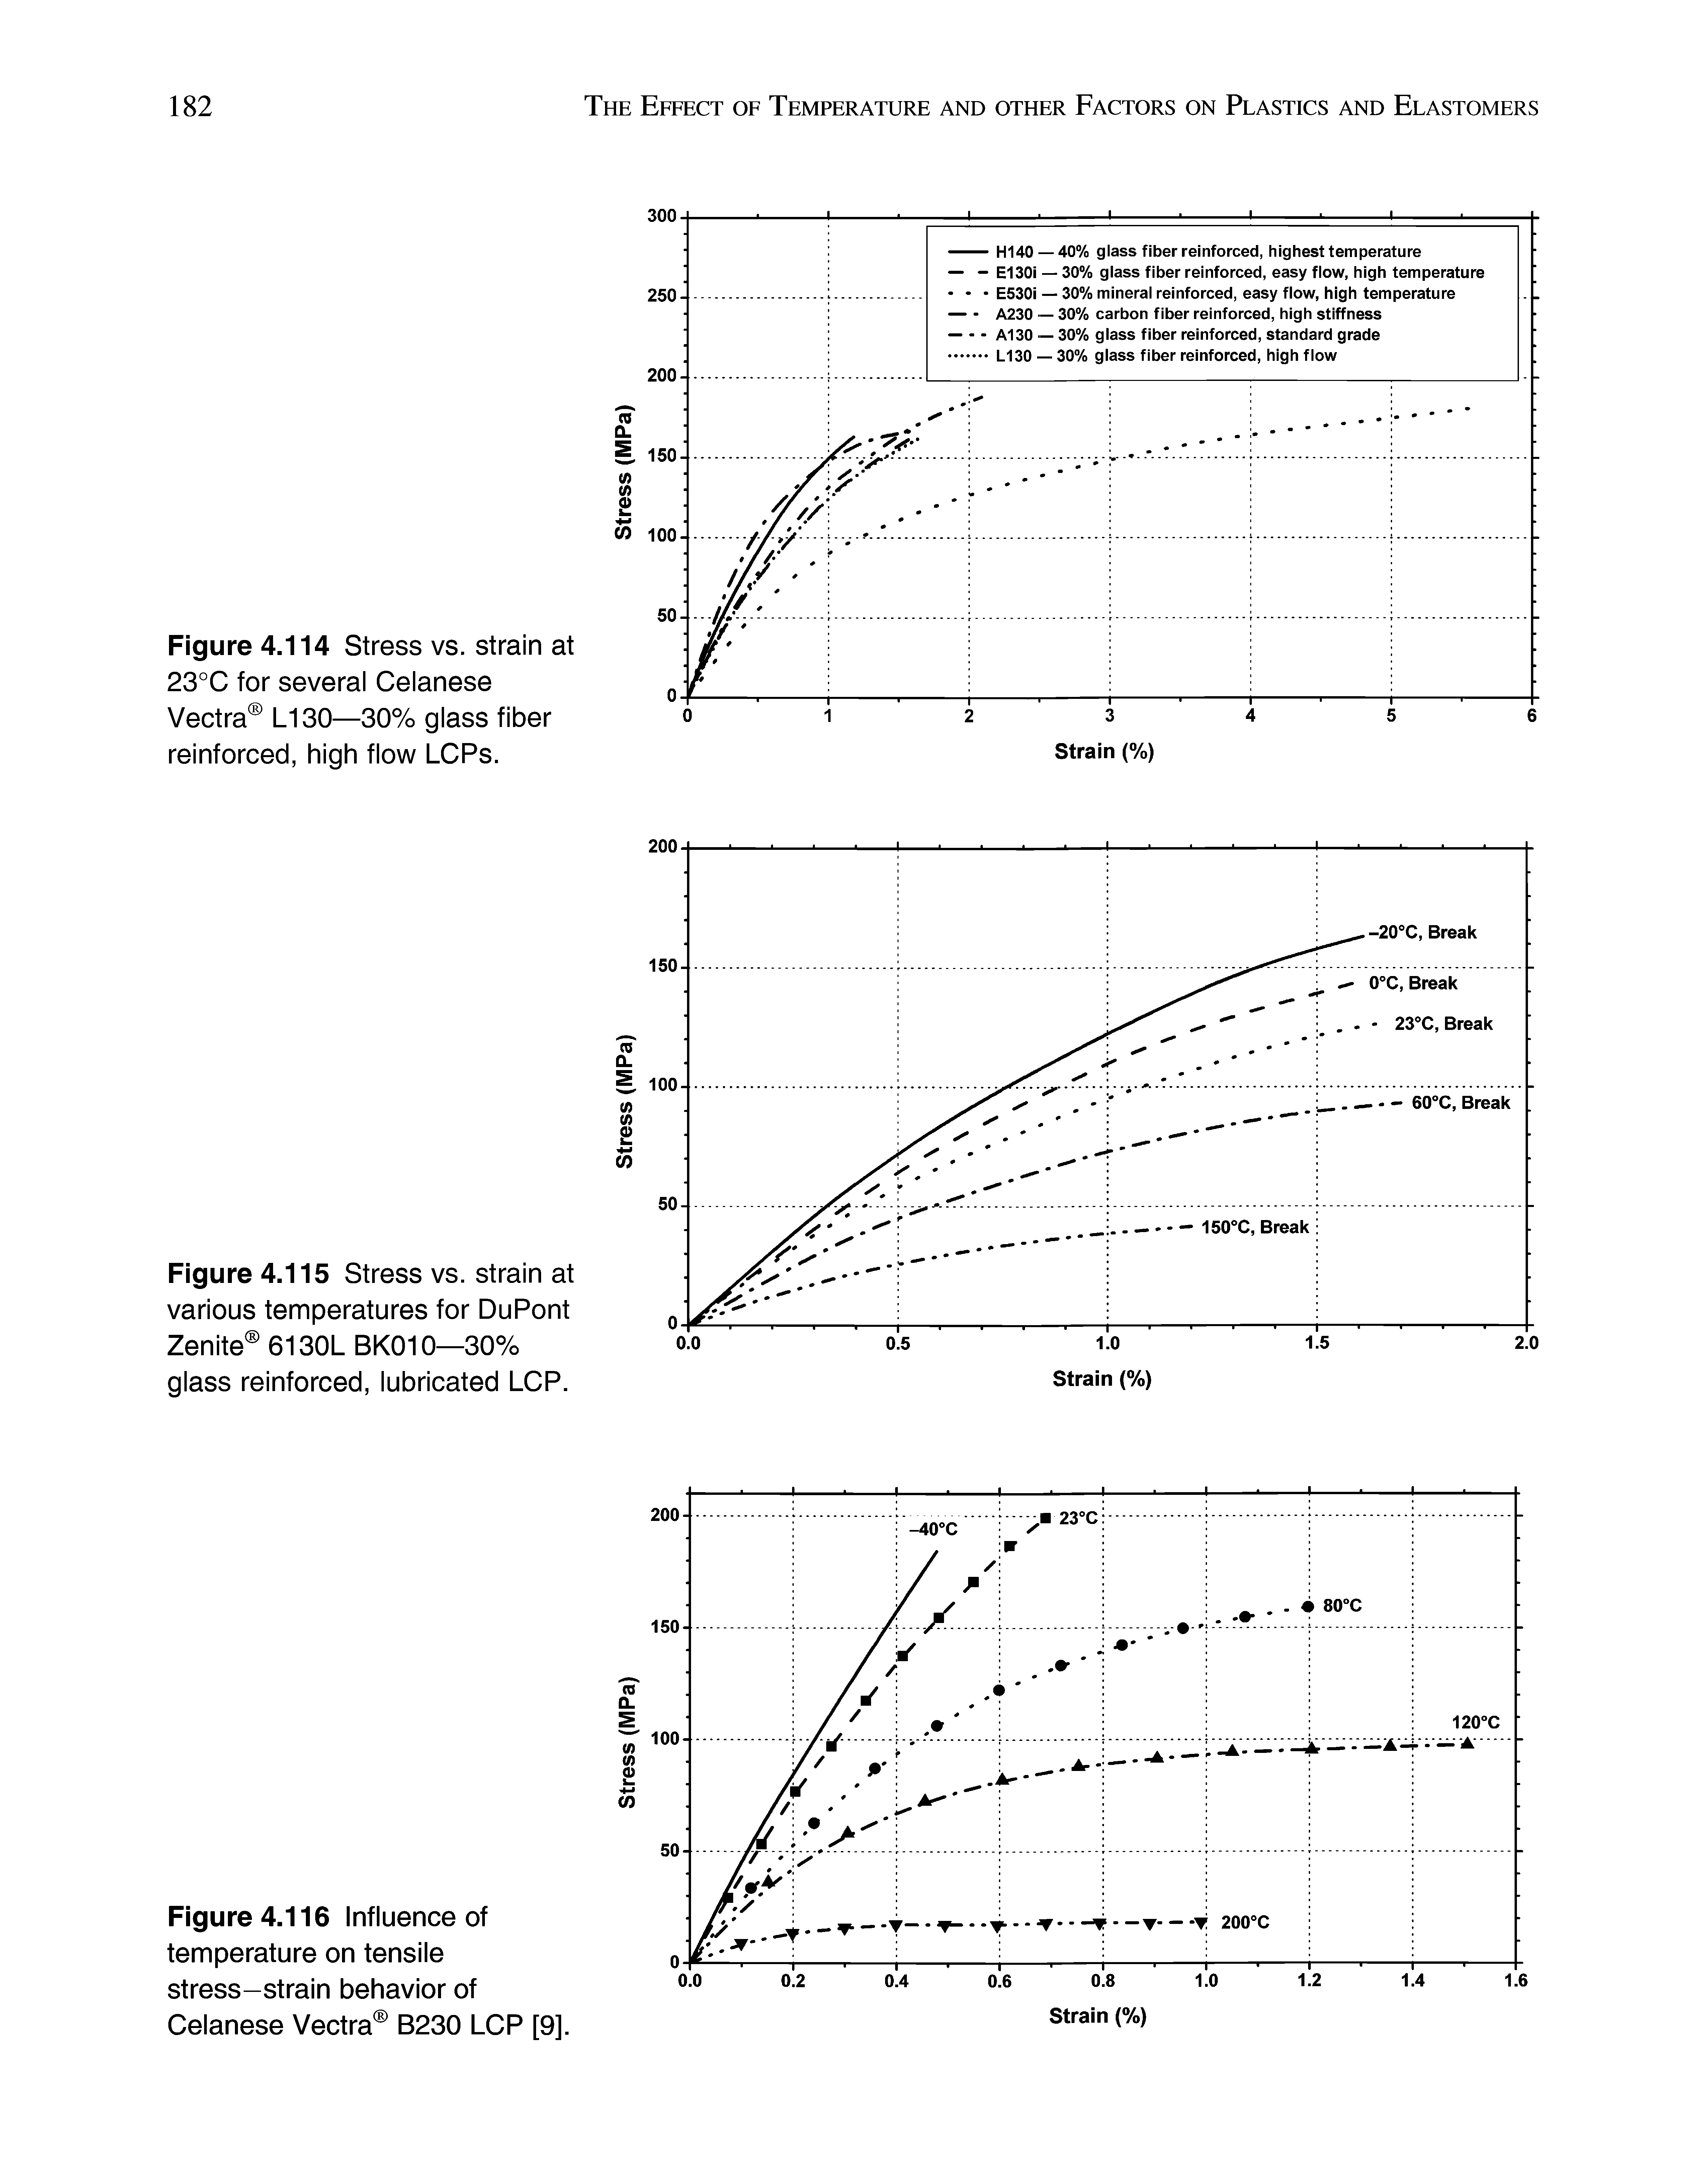 Figure 4.115 Stress vs. strain at various temperatures for DuPont Zenite 6130L BK010—30% glass reinforced, lubricated LCP.